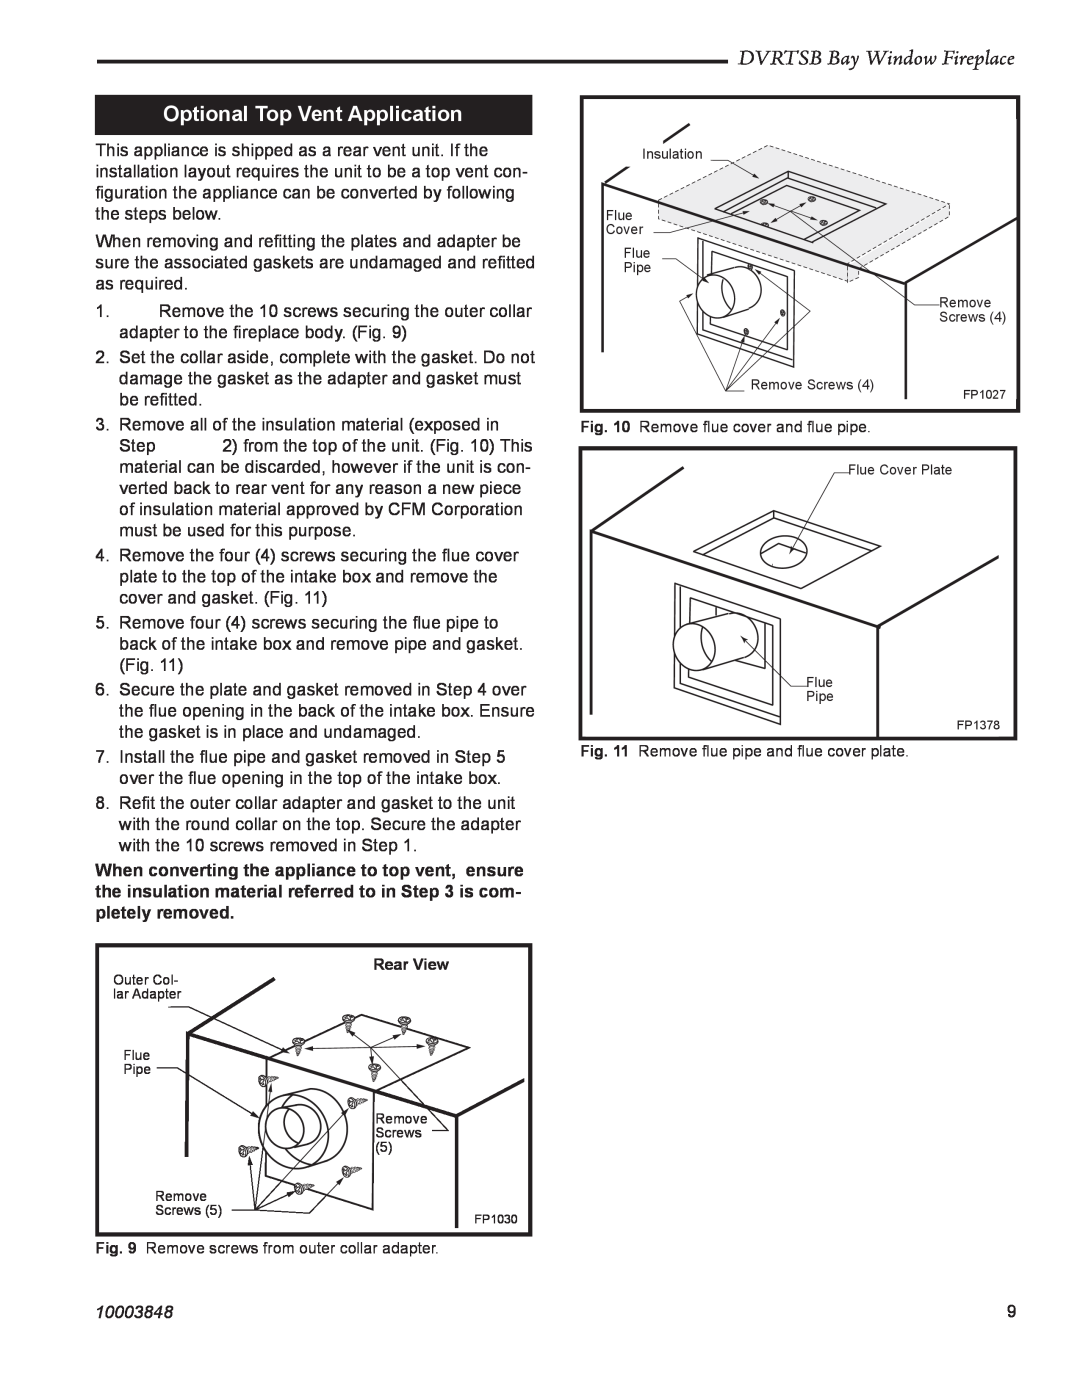 Vermont Casting manual Optional Top Vent Application, DVRTSB Bay Window Fireplace, 10003848 